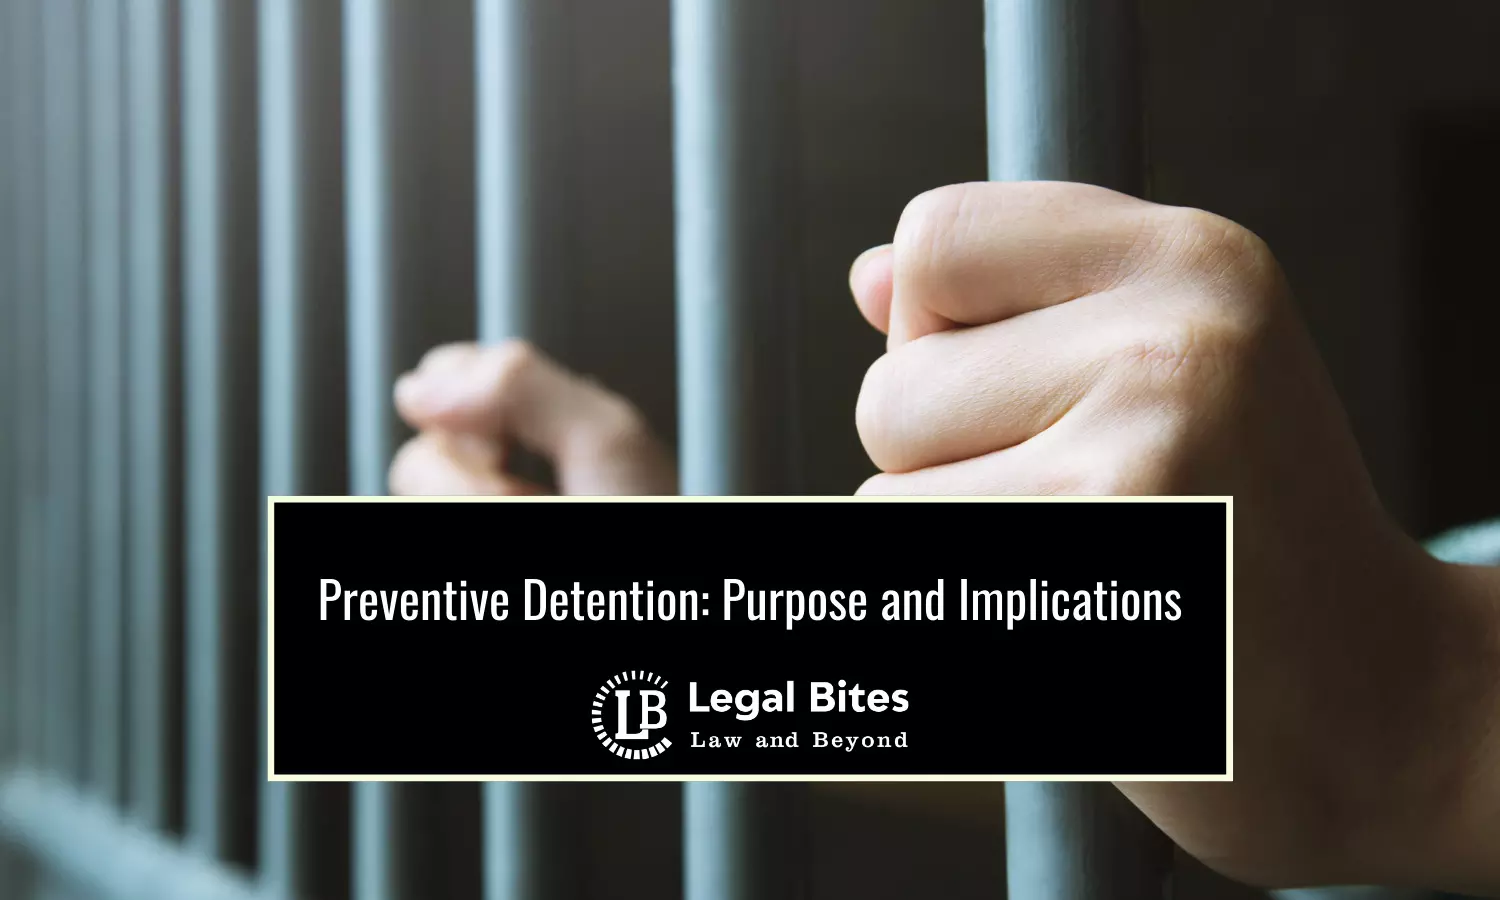 Preventive Detention: Purpose and Implications